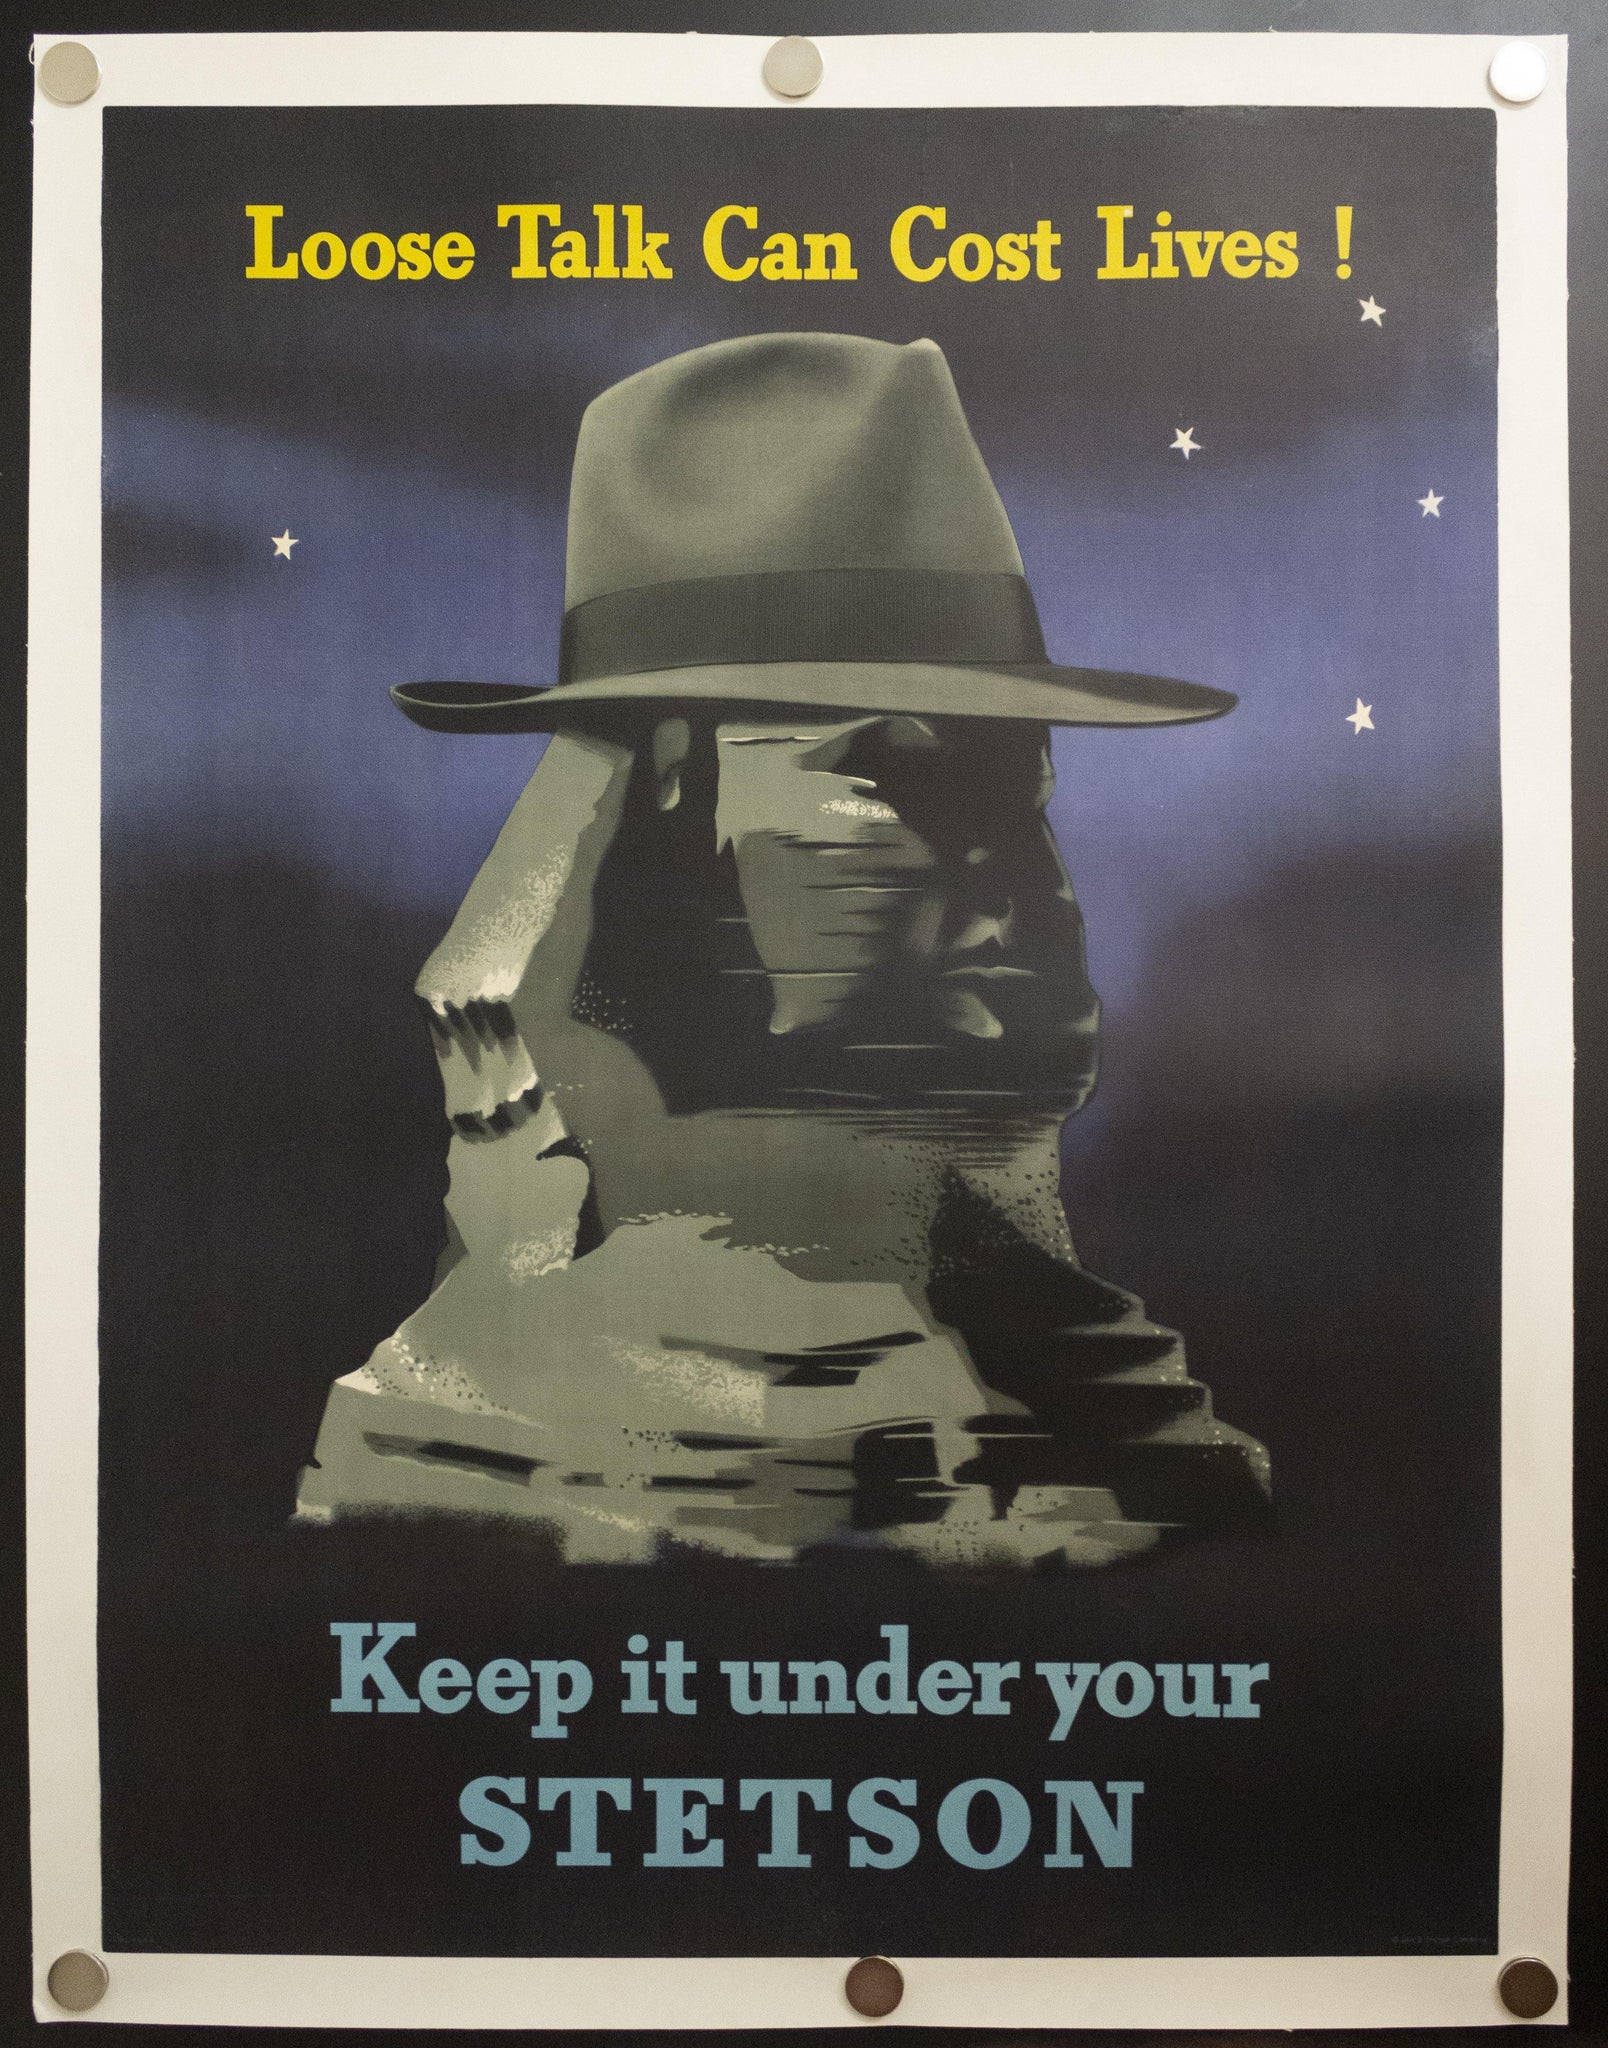 1942 Keep It Under Your Stetson by Edward McKnight Kauffer Loose Talk Can Costs Lives! - Golden Age Posters